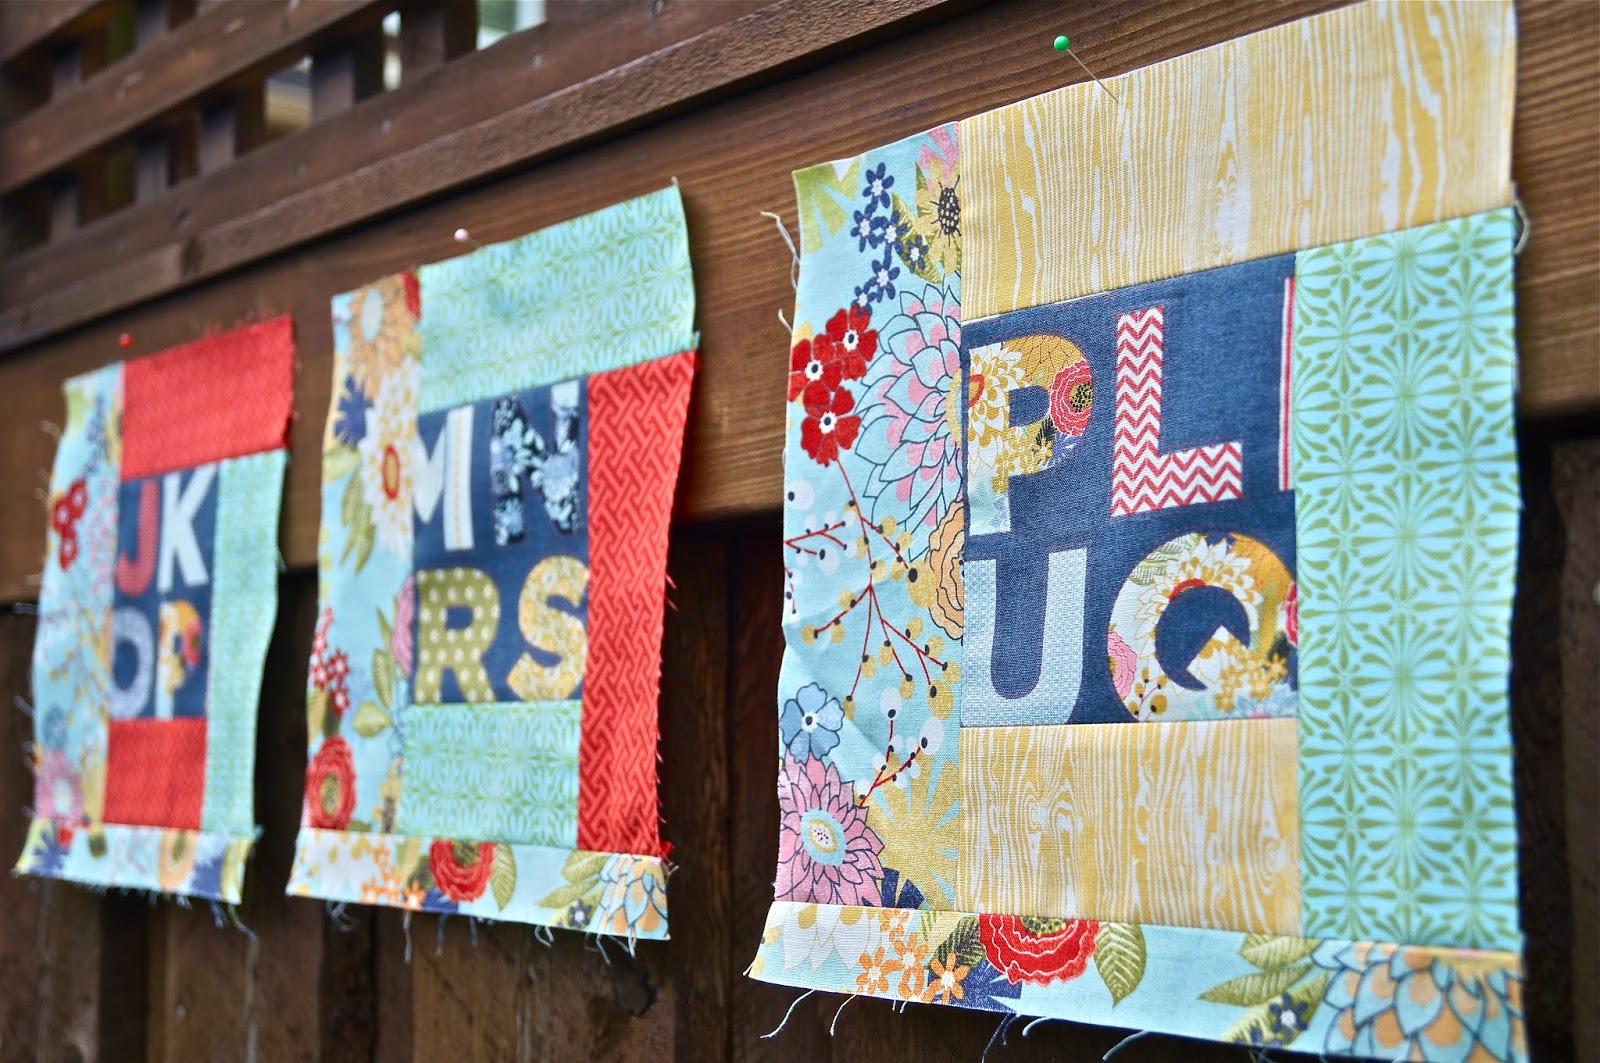 Hilltop House Creative Works: ABC - a Quilt for a Special Friend